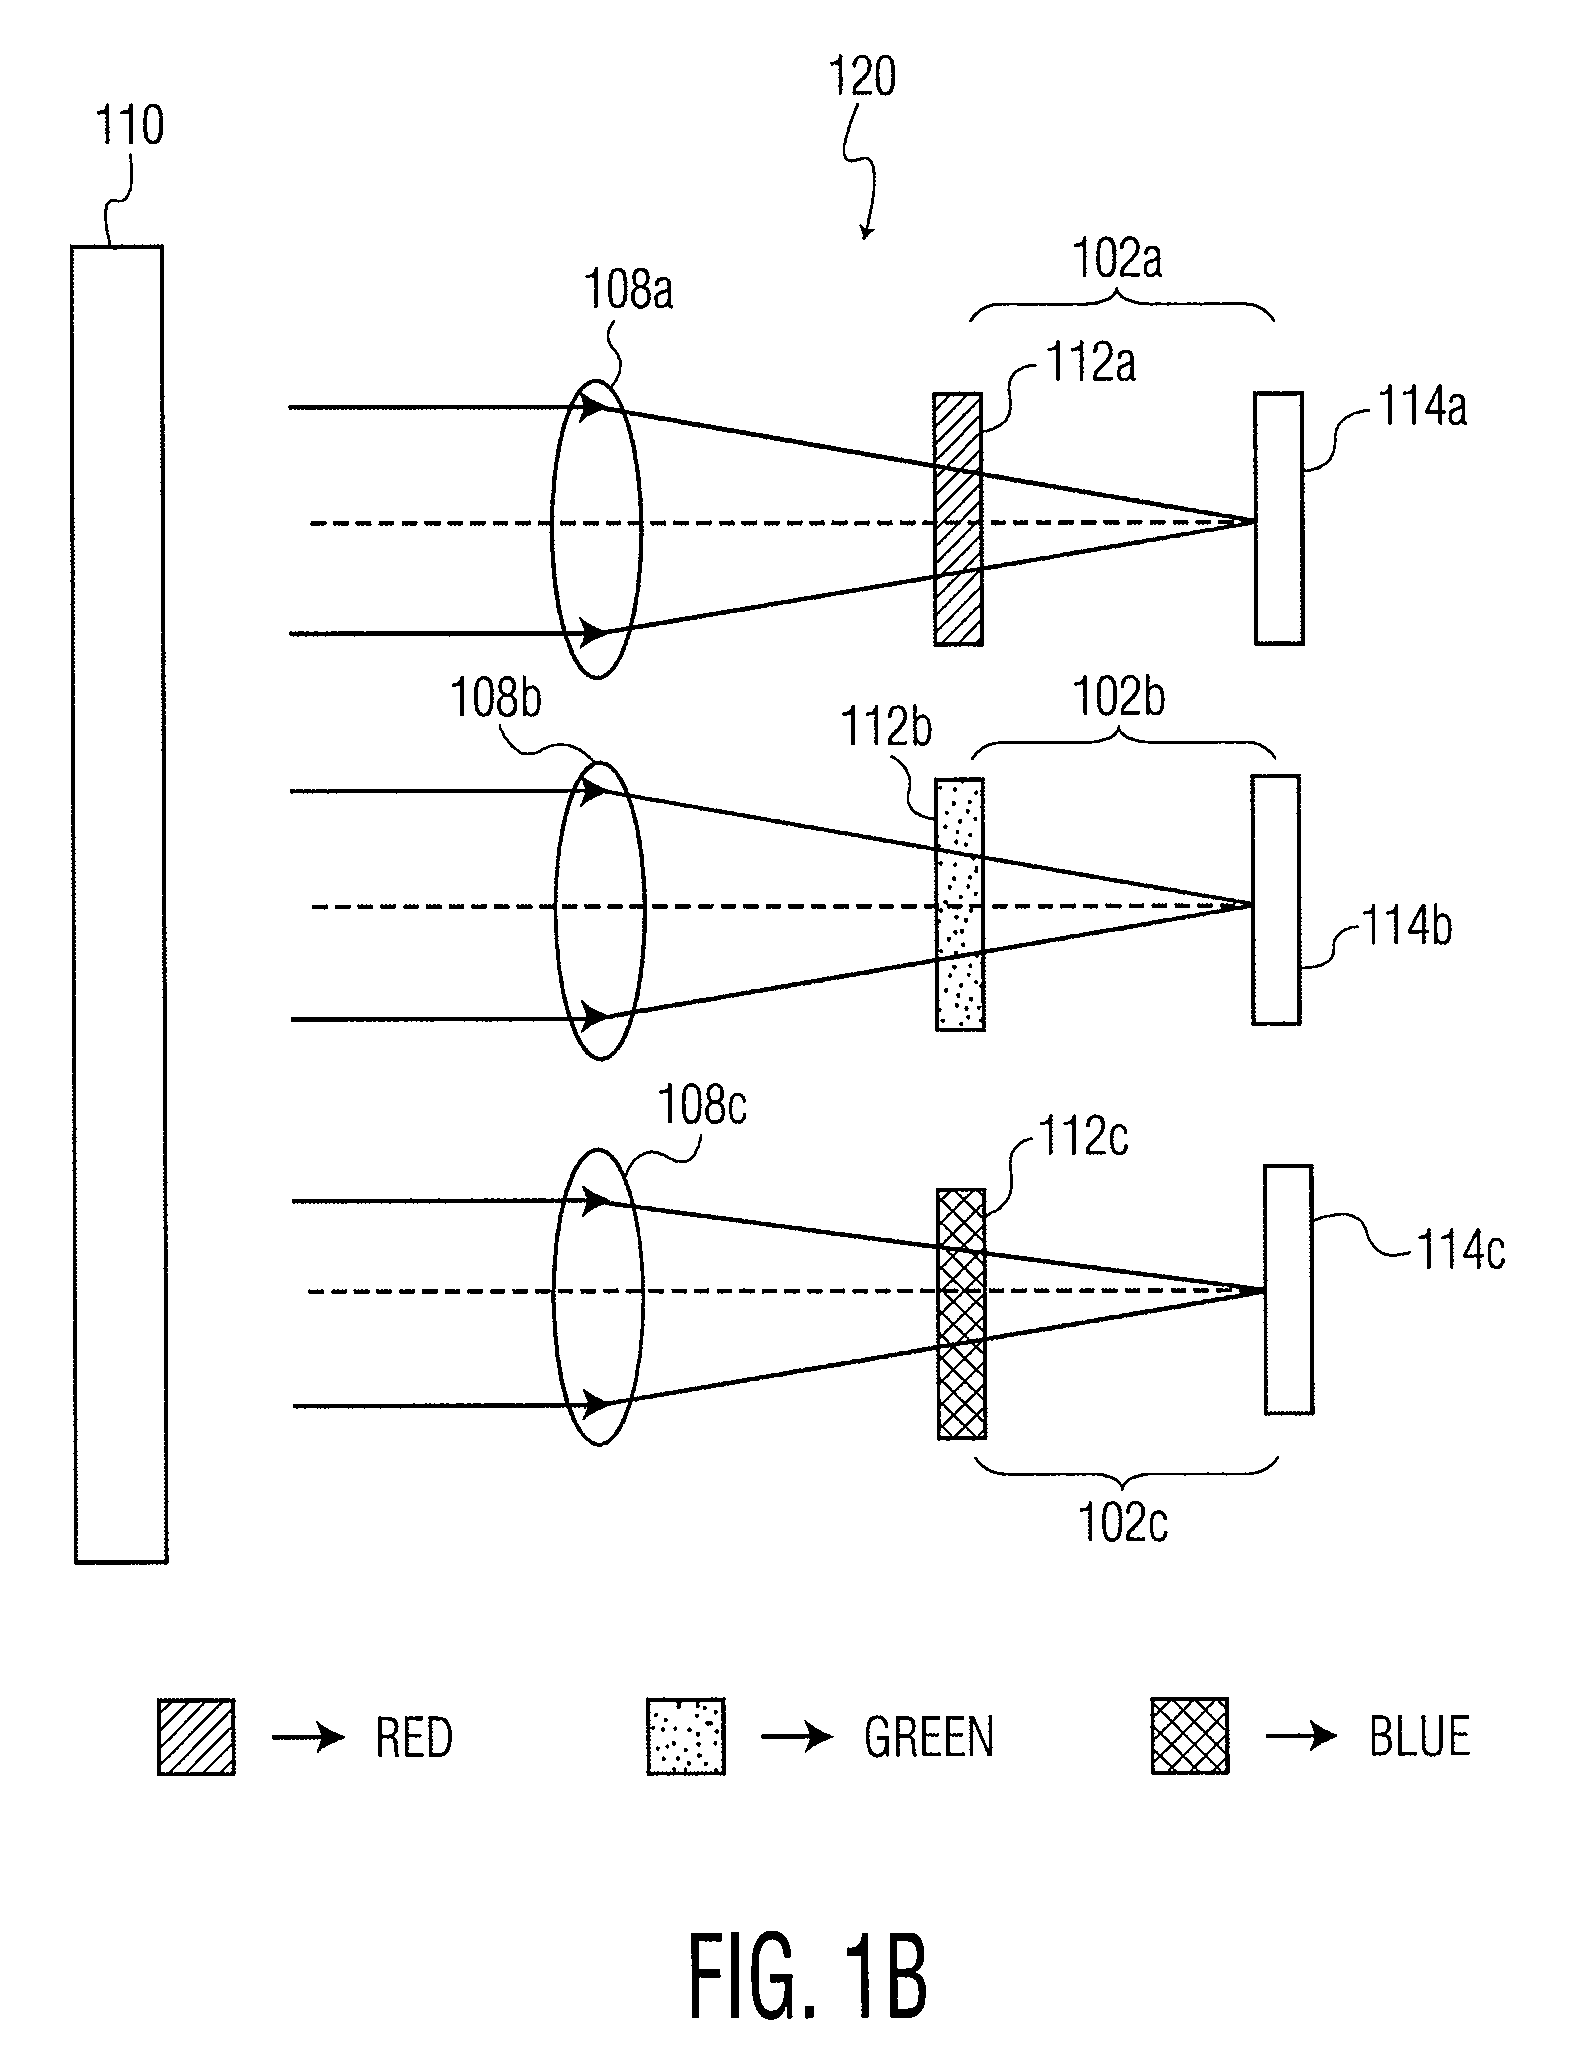 Multi-array sensor with integrated sub-array for parallax detection and photometer functionality